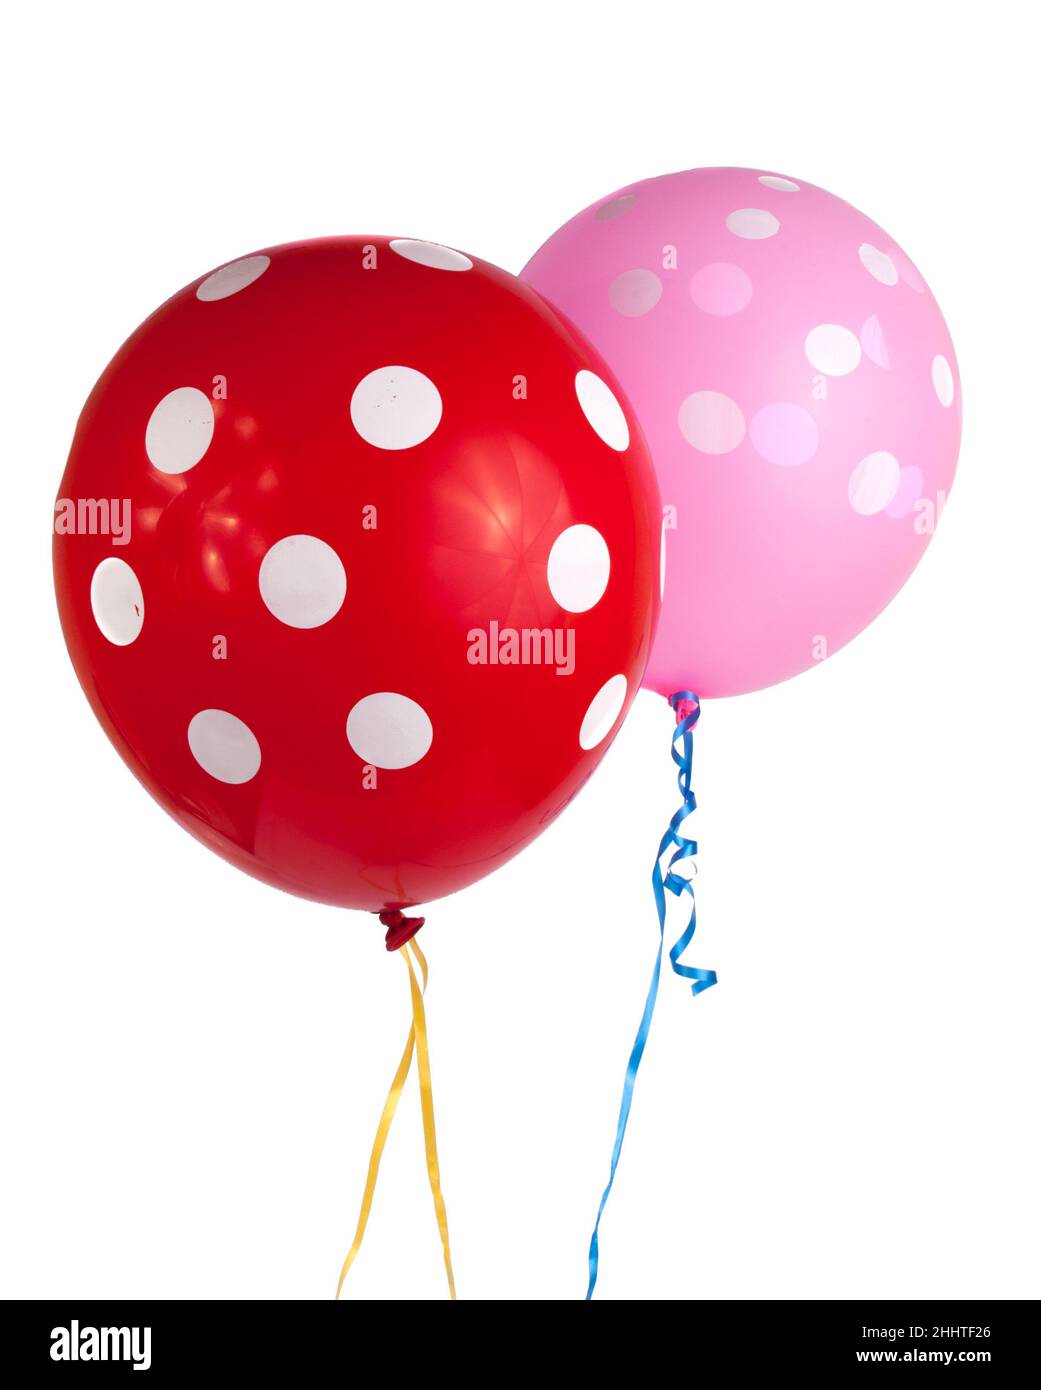 Balloon with White Dots Isolated Stock Photo - Image of balloon, dots:  133406744